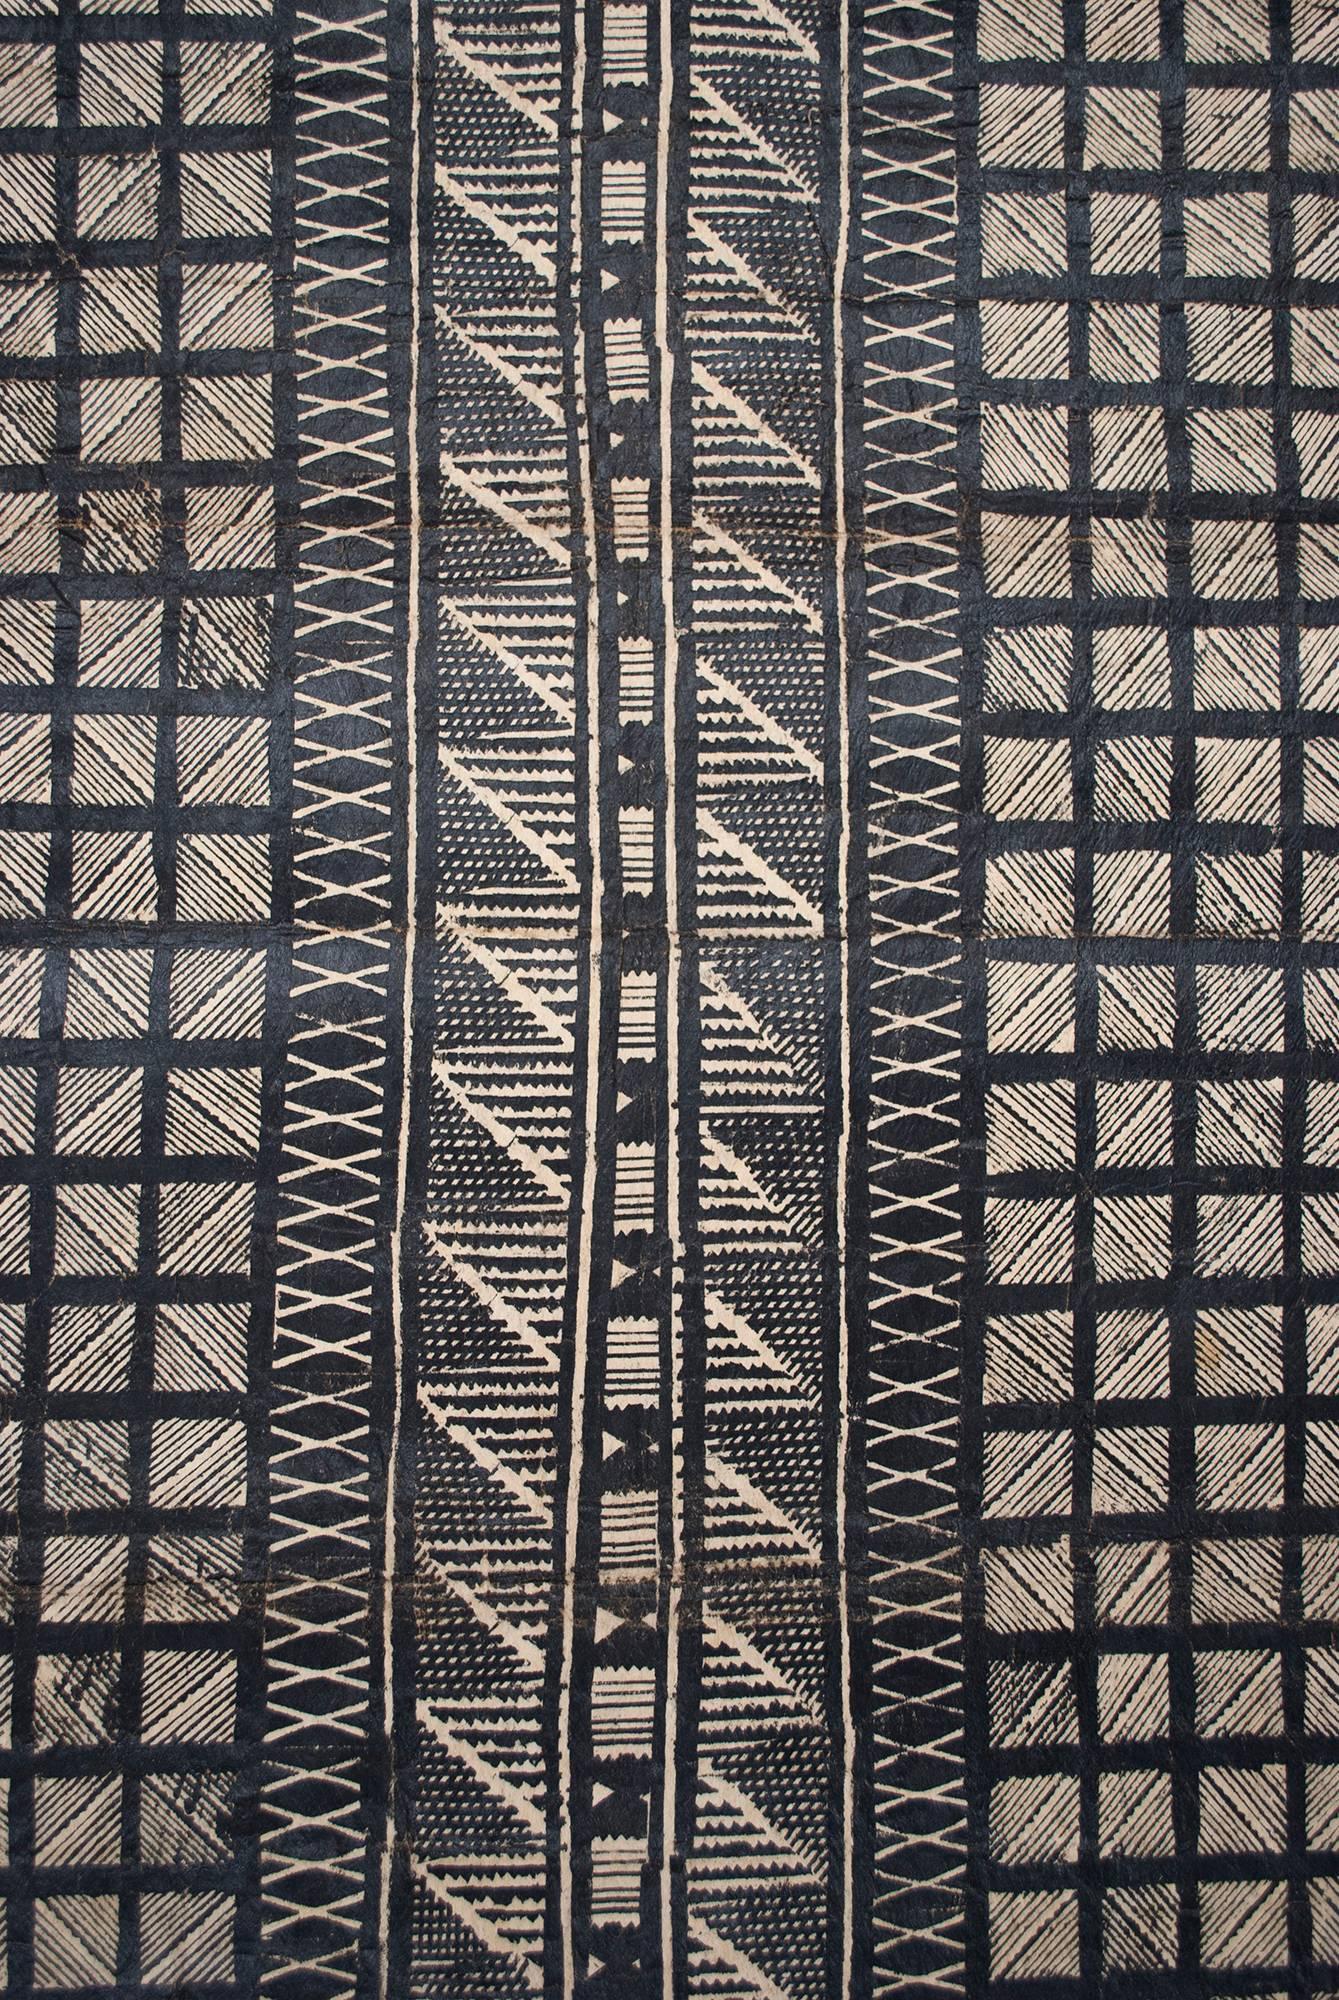 Tapa cloth made from mulberry fiber with natural pigments, Fiji, mid-20th century.